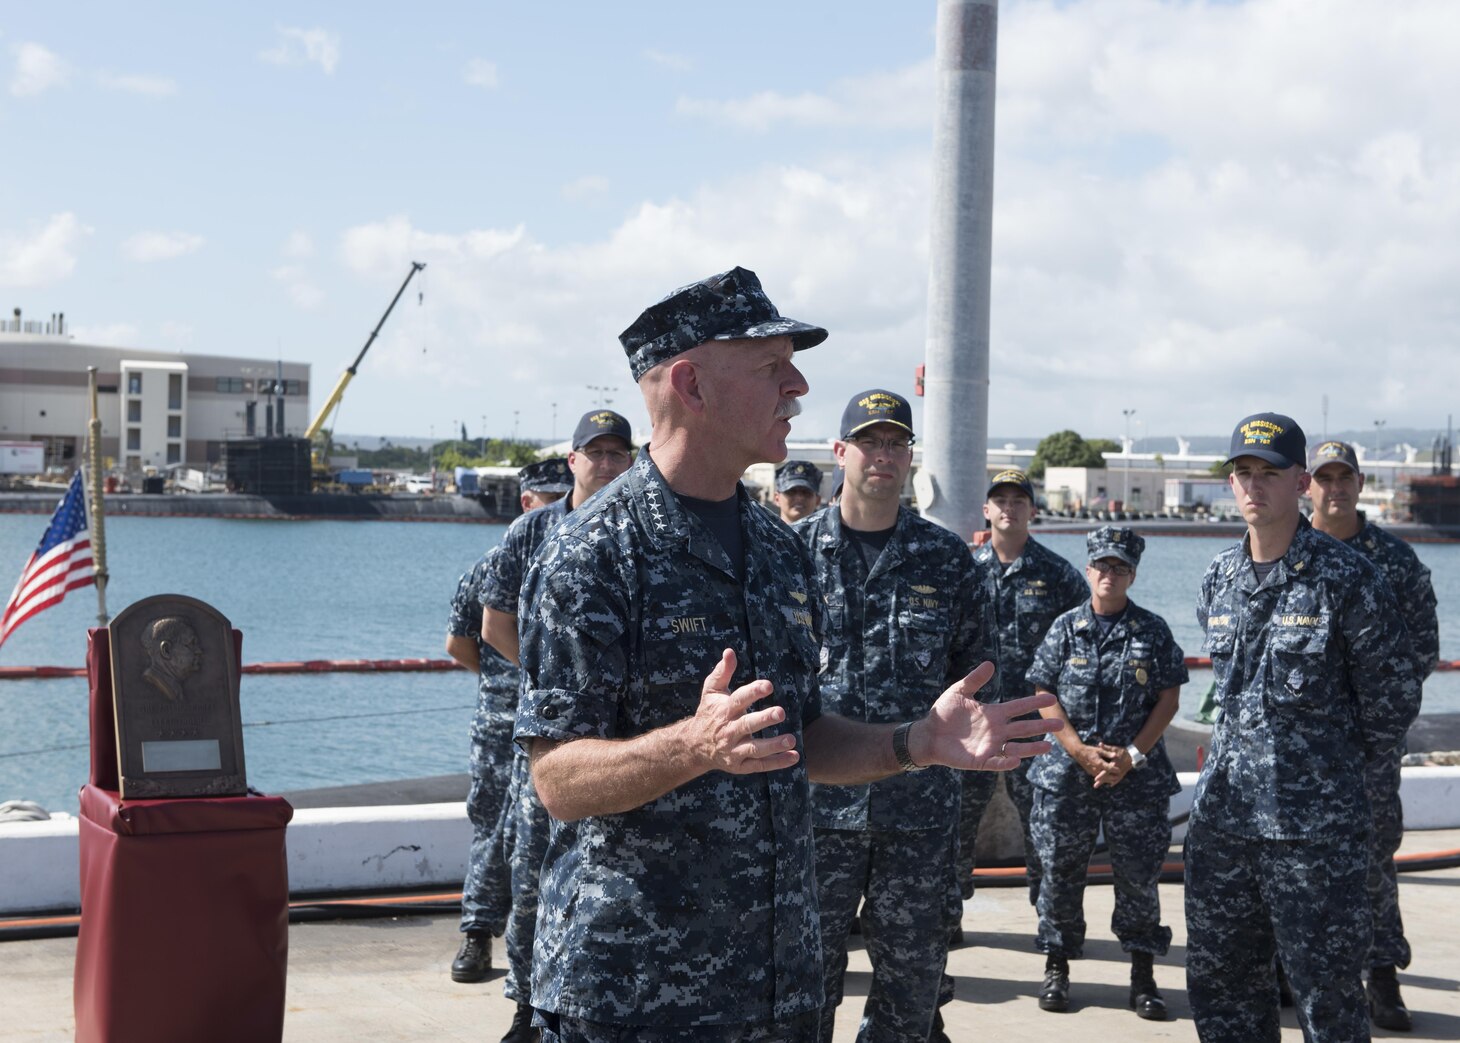 170830-N-KV911-104 PEARL HARBOR, Hawaii (Aug. 30, 2017) Adm. Scott Swift, commander, U.S. Pacific Fleet presents the Arleigh Burke Fleet Trophy to the crew of the Virginia-class fast-attack submarine USS Mississippi (SSN 782). The trophy is awarded to a ship that best represents the fleet, achieving the best overall improvement in battle efficiency, and is presented annually to the most-improved ships or aviation squadrons in both the Atlantic and Pacific Fleets. (U.S. Navy photo by Mass Communication Specialist 2nd Class Shaun Griffin)